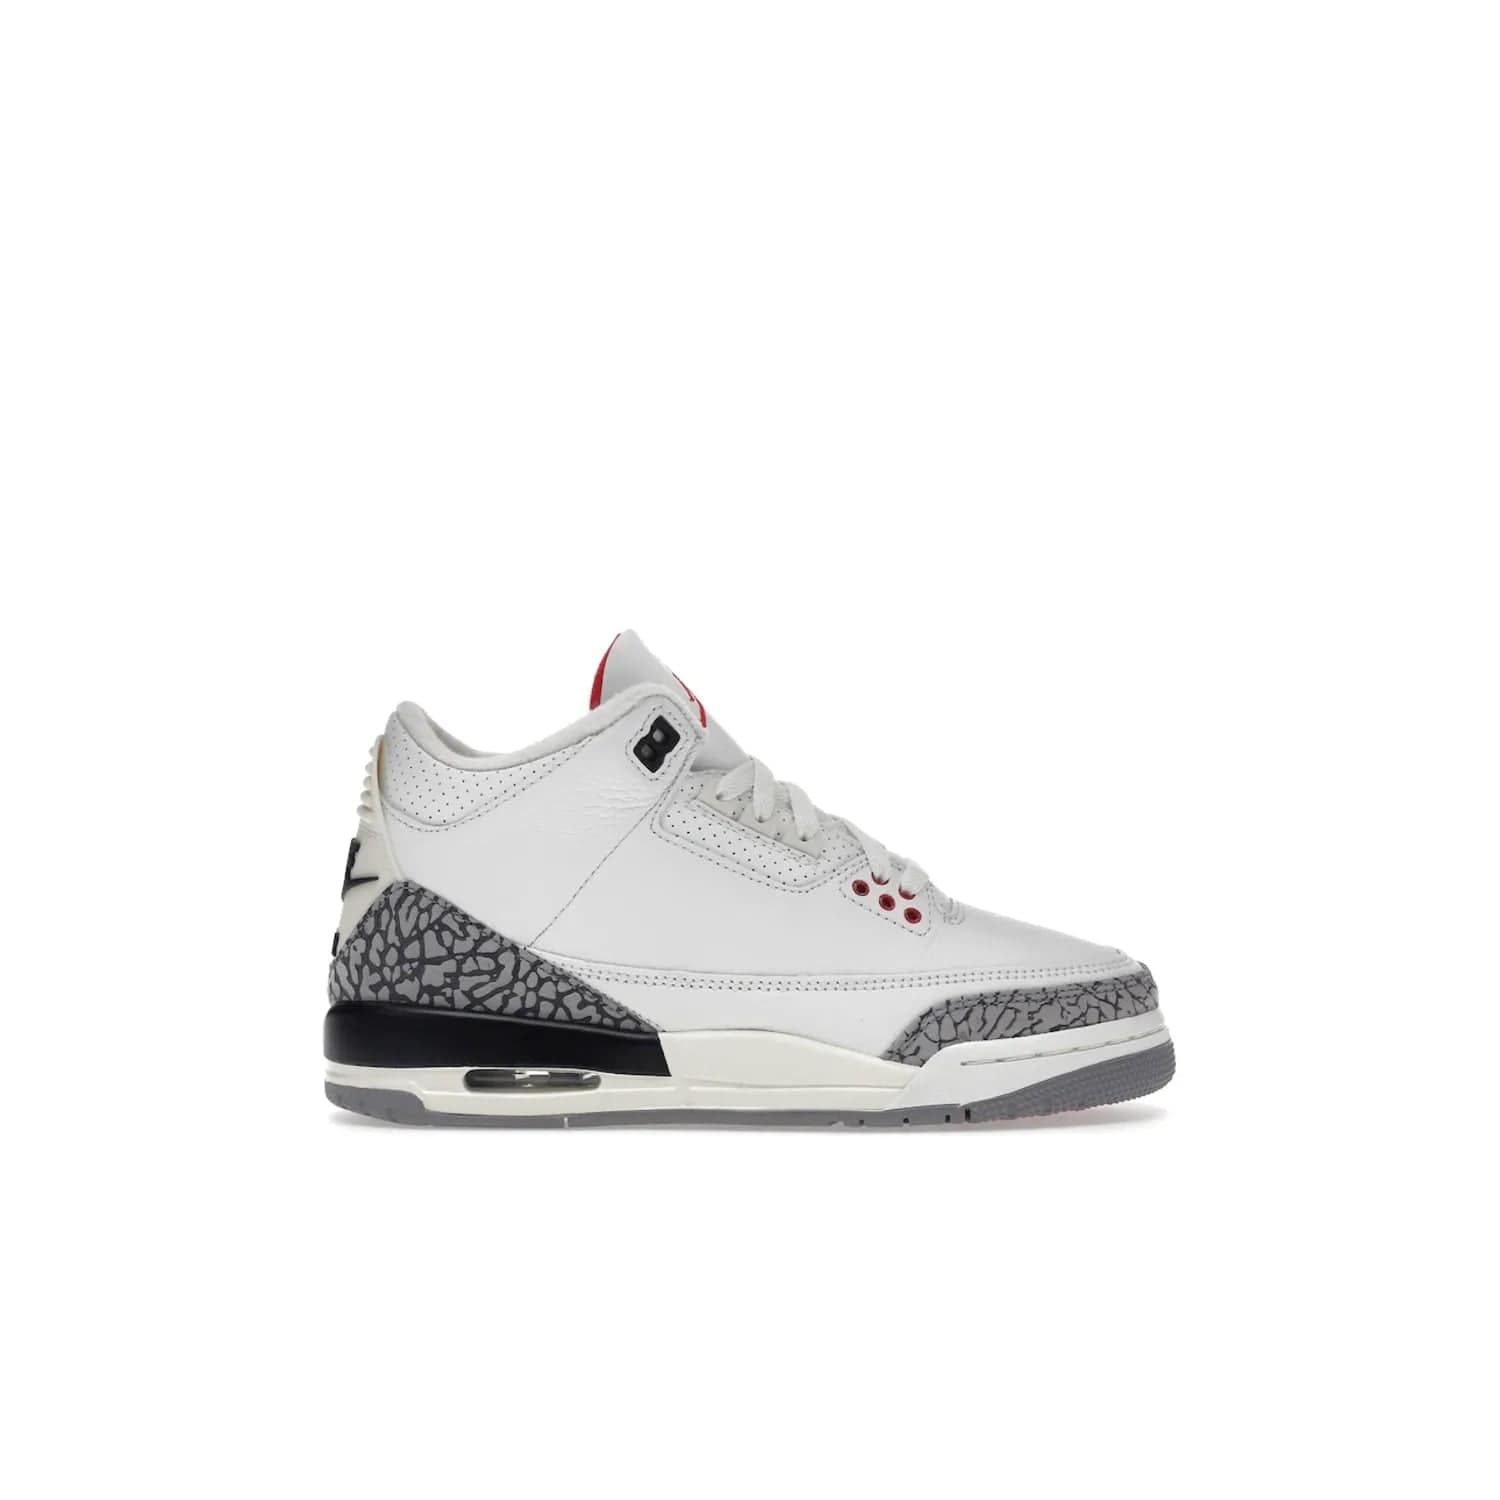 Jordan 3 Retro White Cement Reimagined (GS) - Image 1 - Only at www.BallersClubKickz.com - Grab the perfect blend of modern design and classic style with the Jordan 3 Retro White Cement Reimagined (GS). Features Summit White, Fire Red, Black, and Cement Grey colorway, iconic Jordan logo embroidered on the tongue, and “Nike Air” branding. Limited availability, get your pair before March 11th 2023.